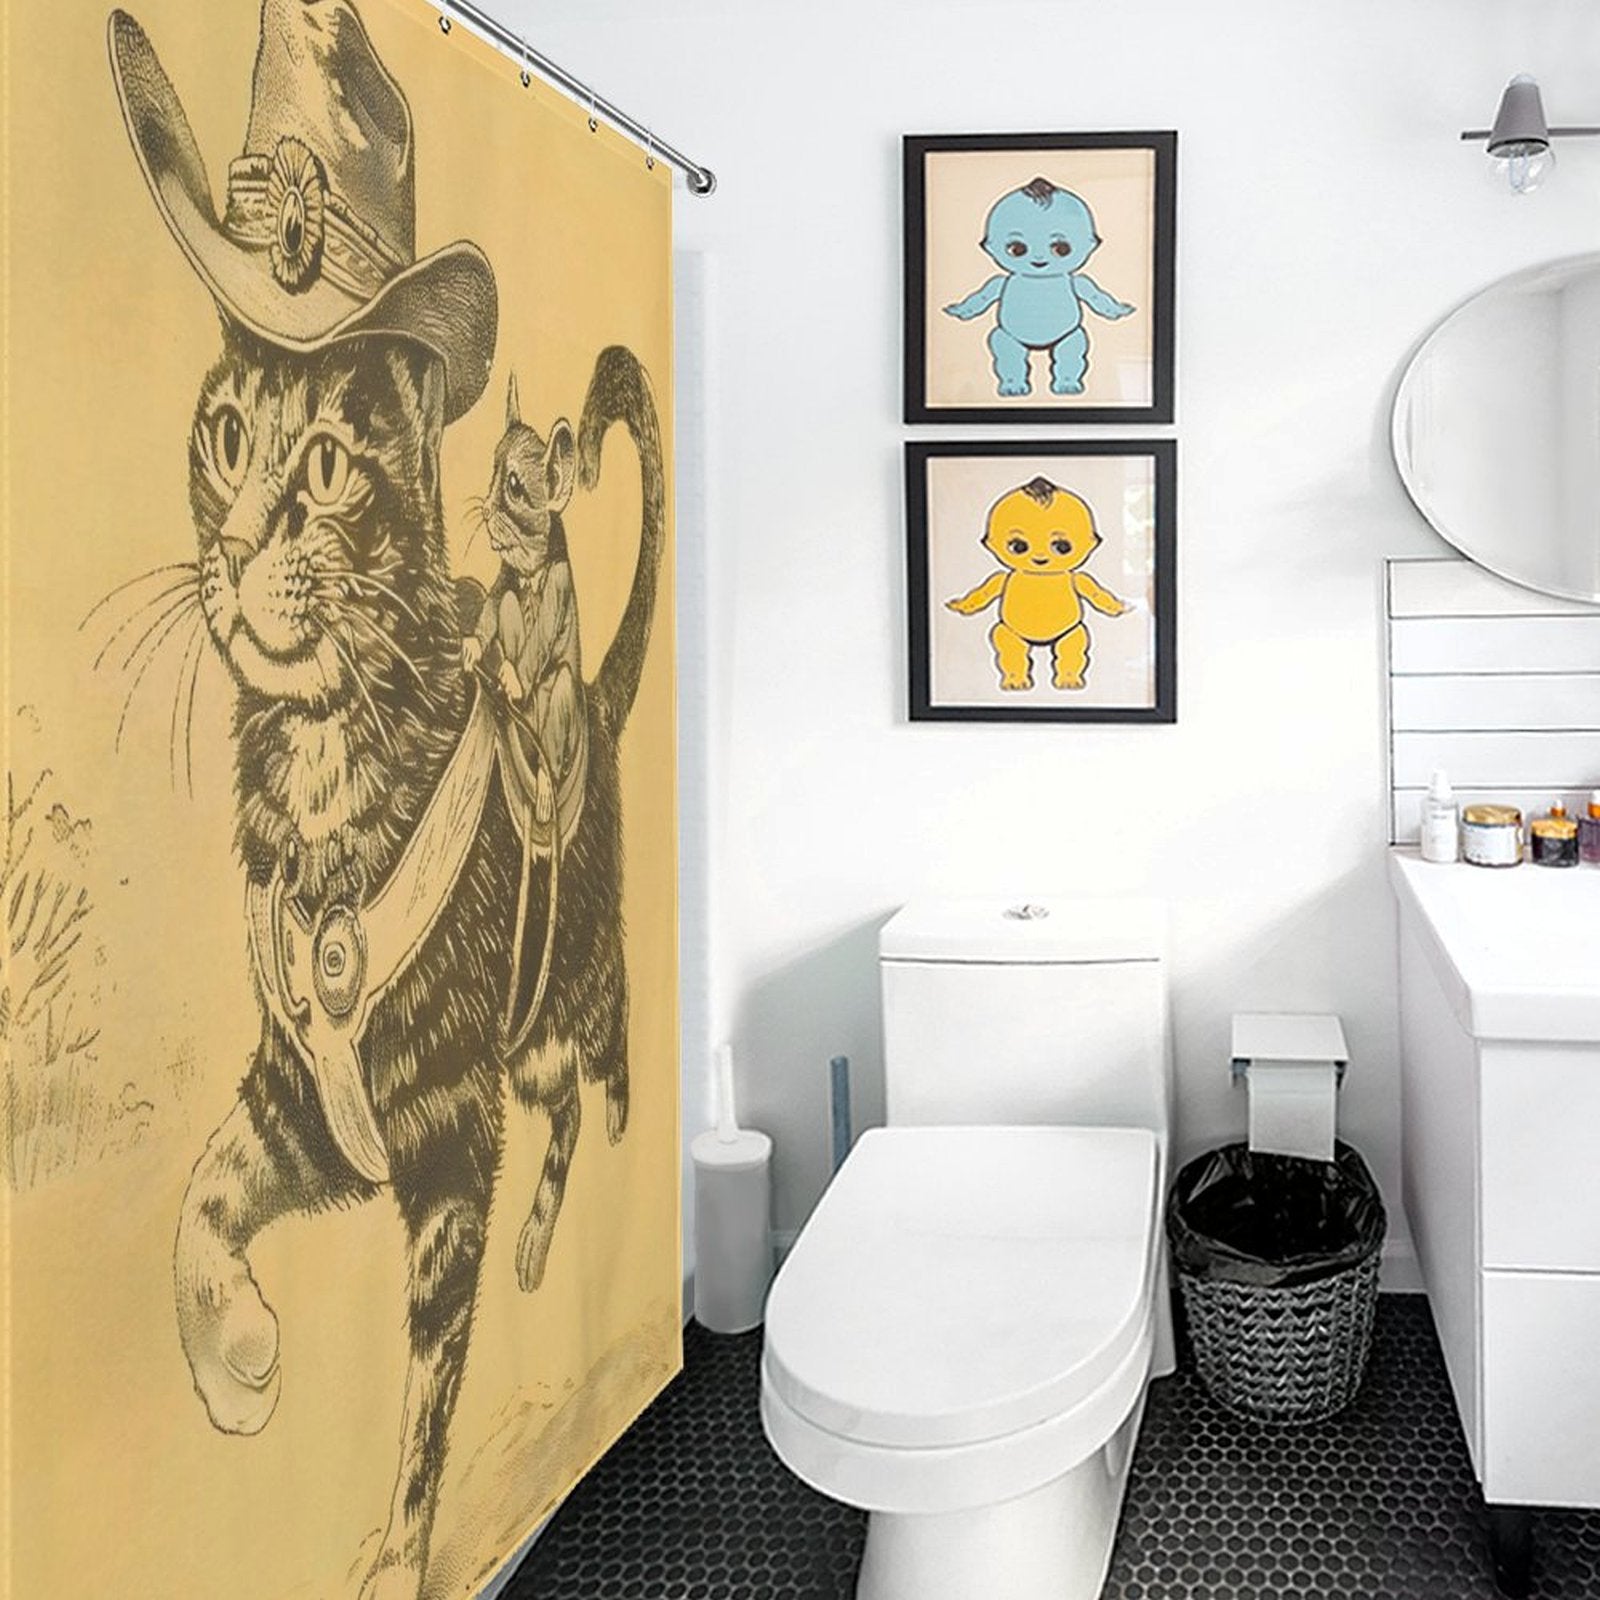 A bathroom with a Cotton Cat Funny Cool Mouse Riding Cat Shower Curtain-Cottoncat featuring a mouse riding a cat and framed art of blue and yellow cartoon characters on the wall, perfect for adding quirky bathroom decor.